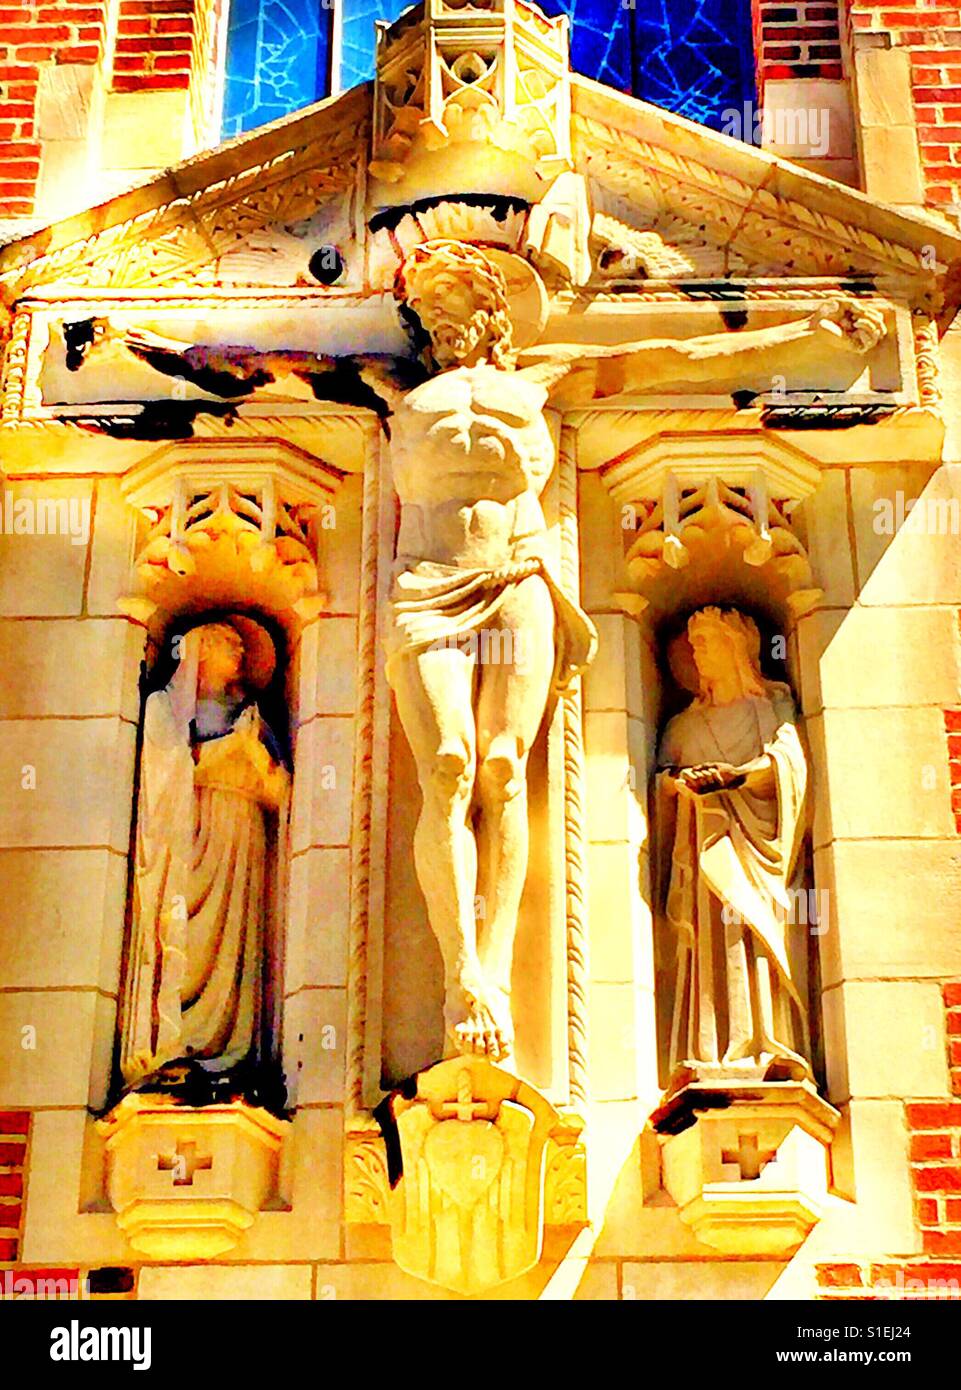 jesus-christ-crucified-statuary-building-face-st-catherine-of-sienna